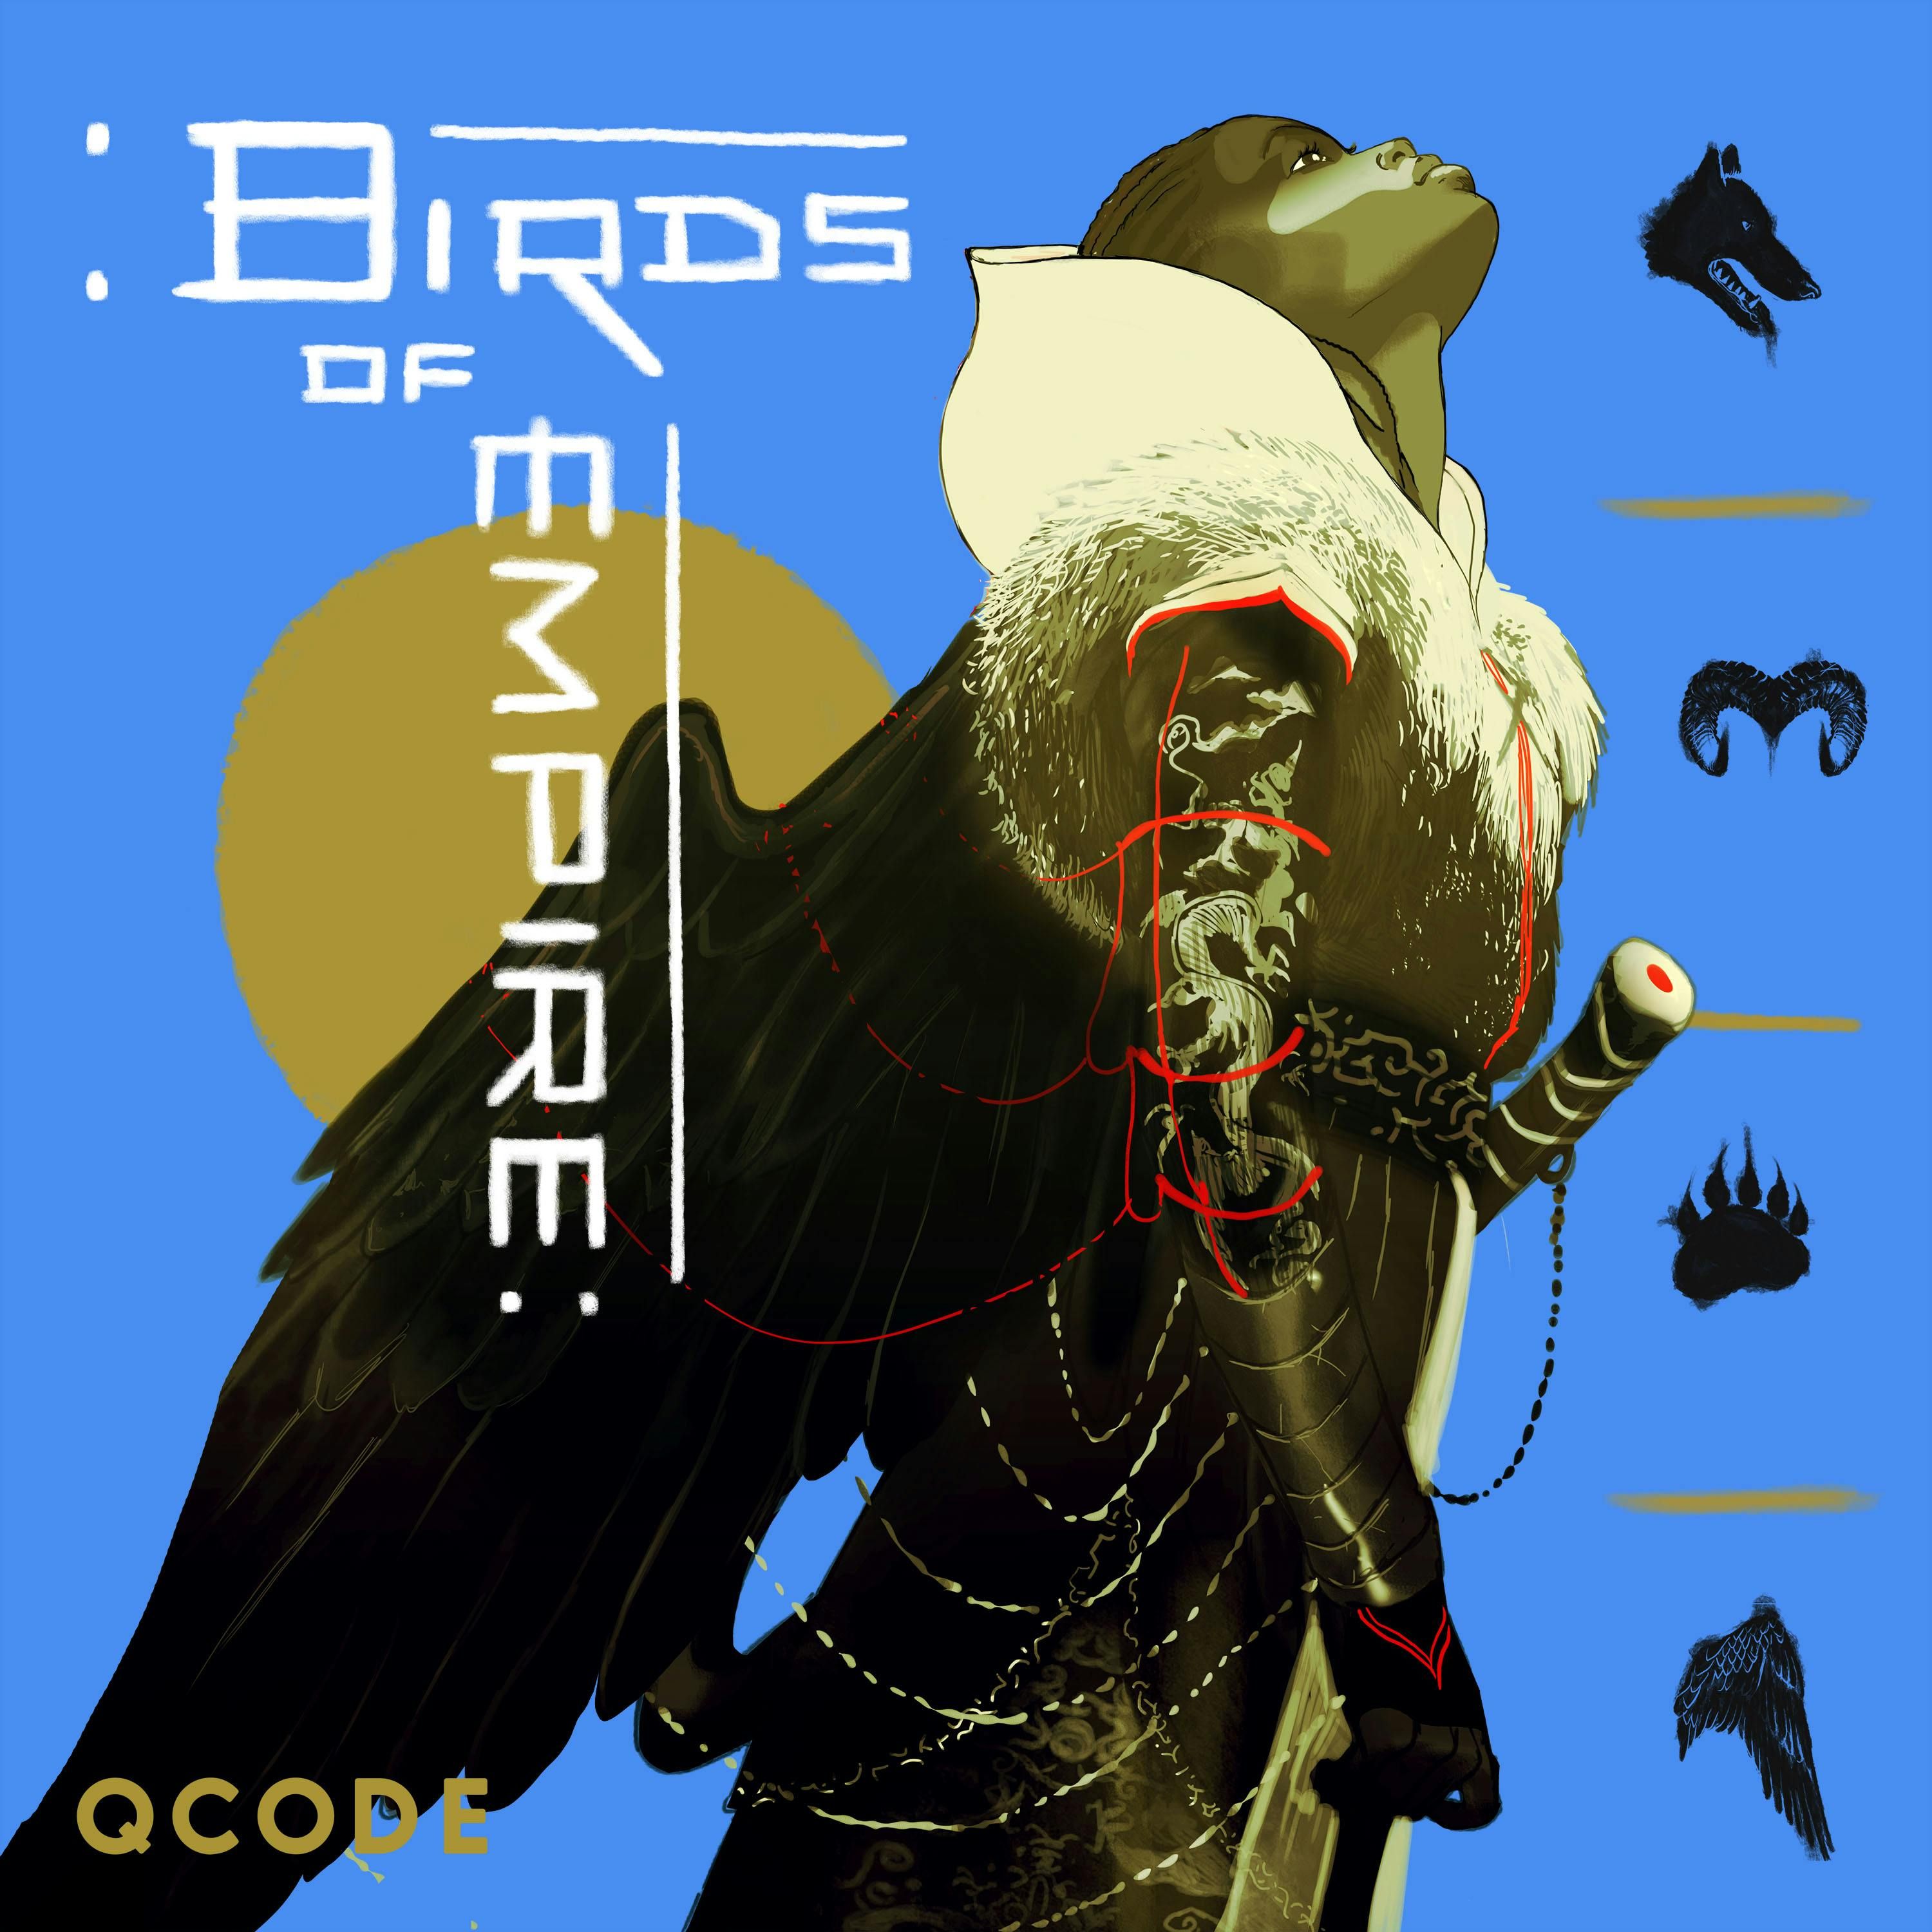 Edith! - Preview: Birds of Empire — an immersive tale of histo...